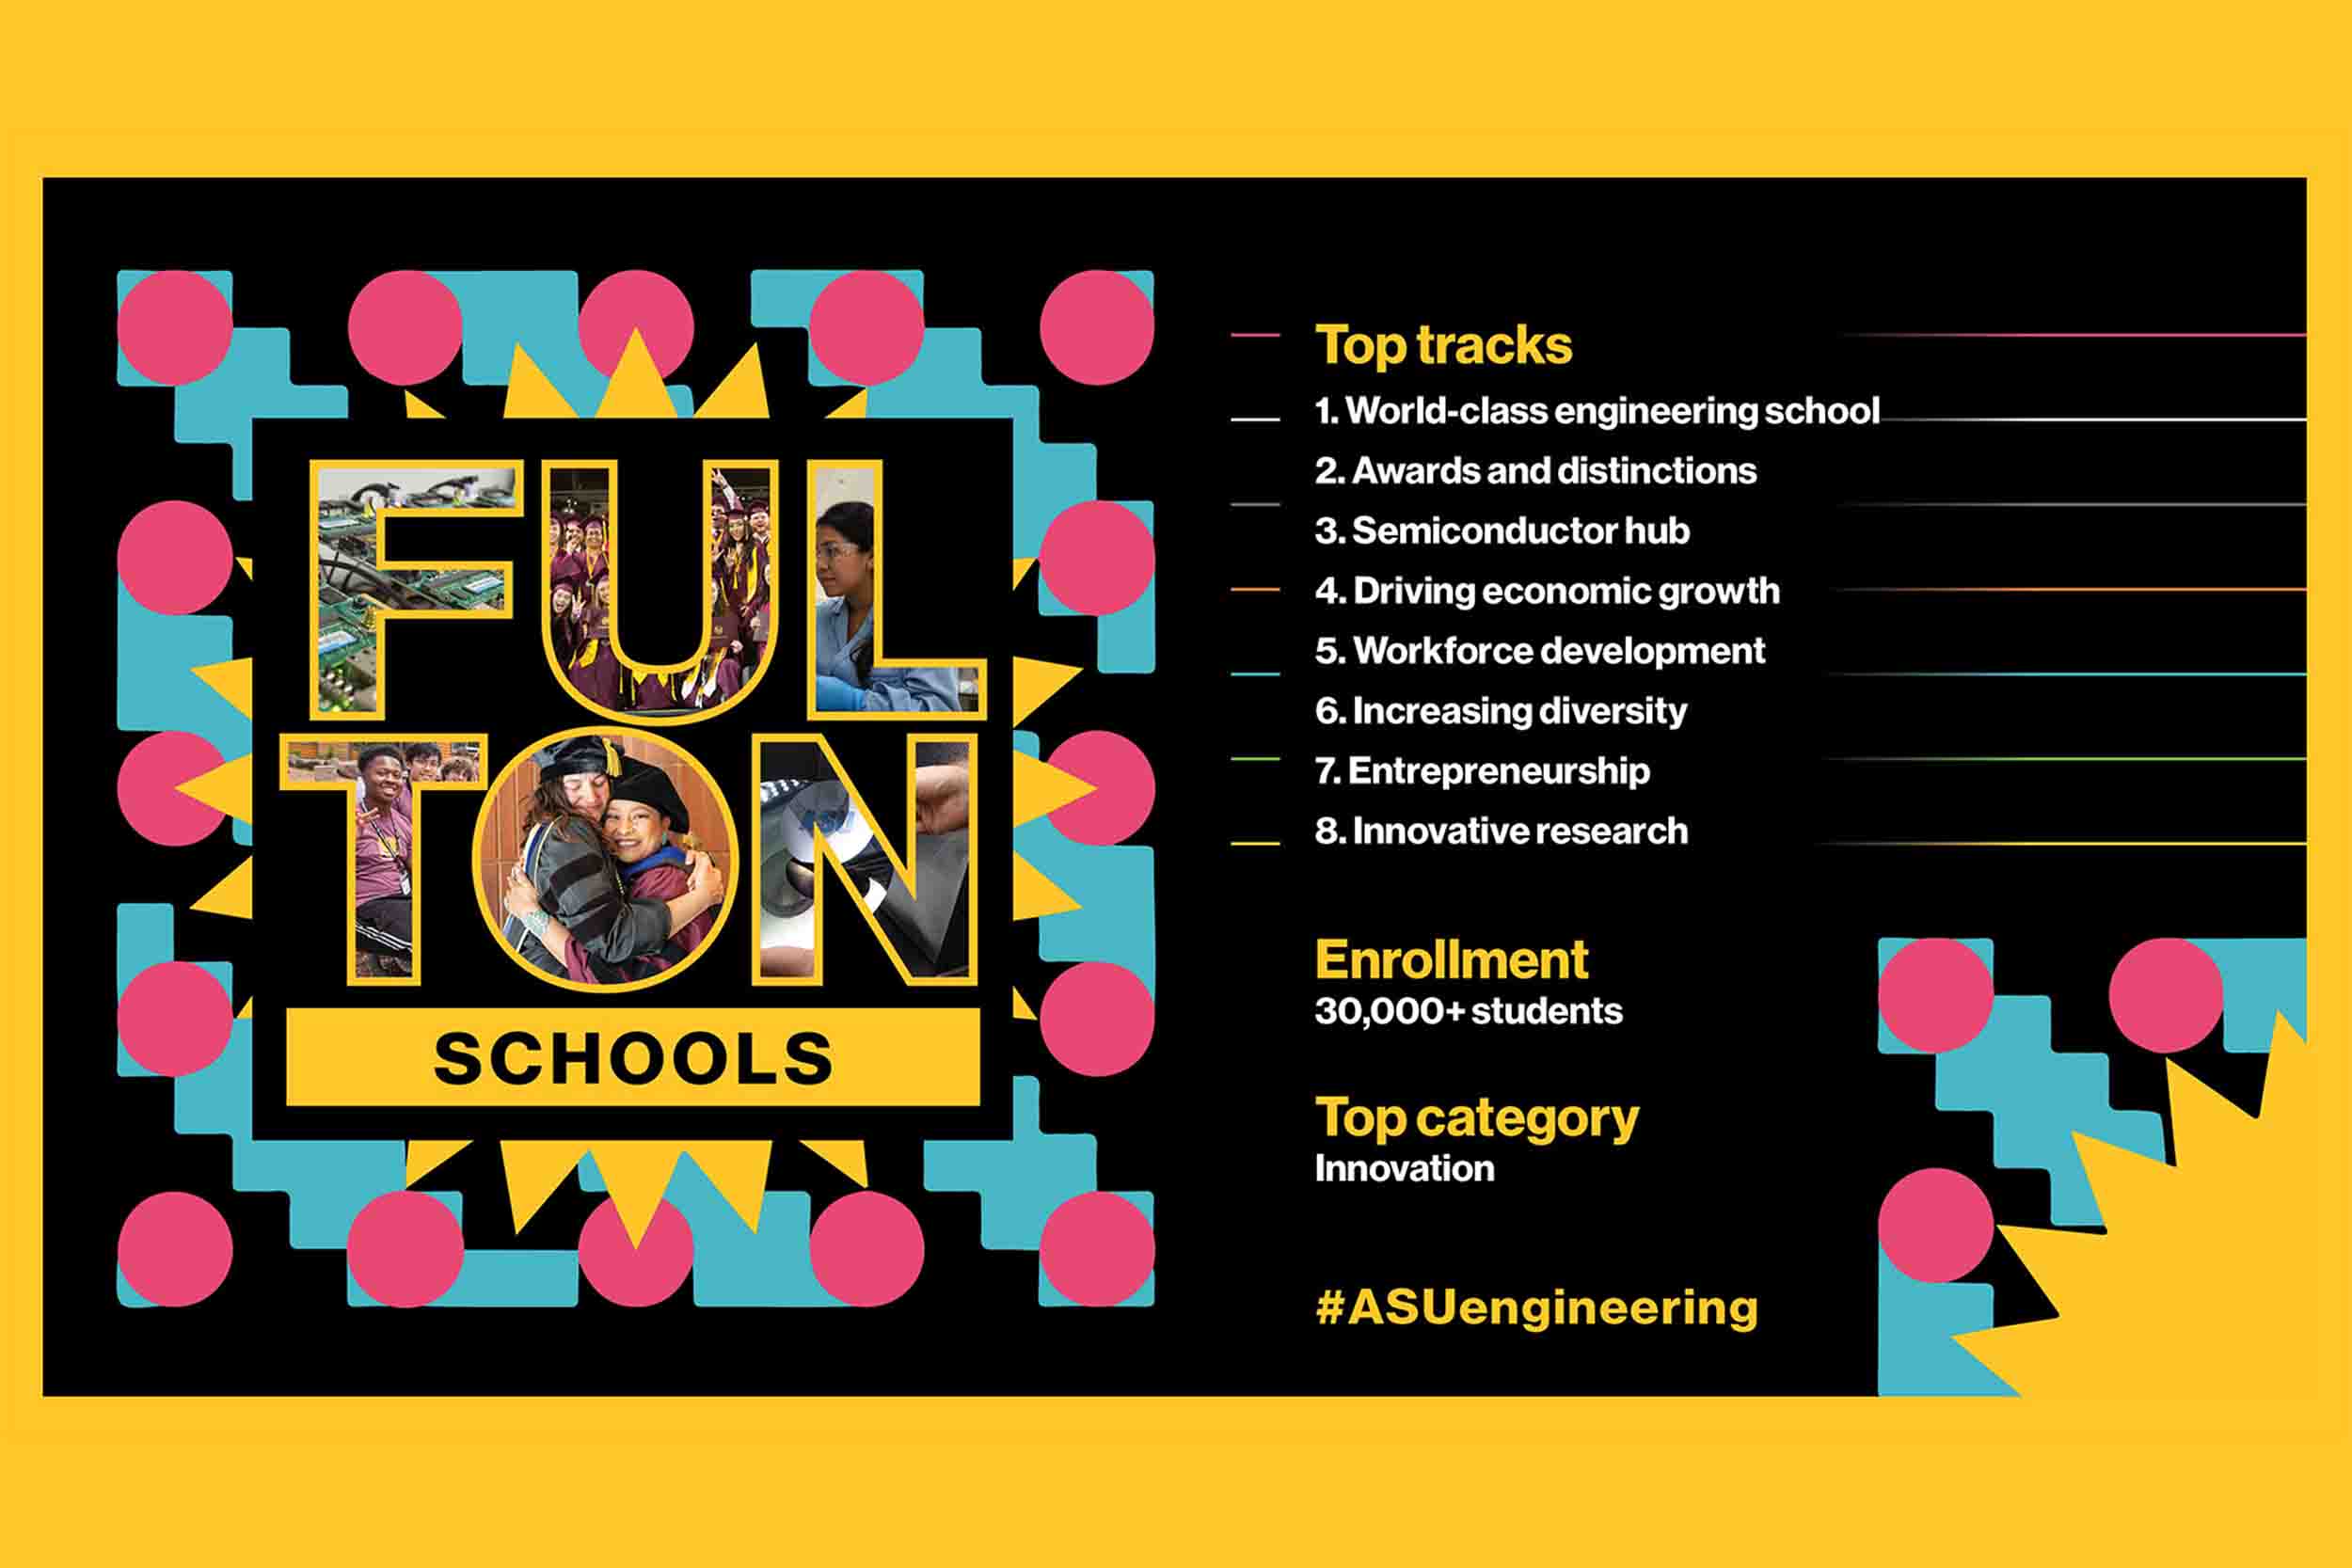 Fulton Schools Year in Review. Top tracks: 1. World-class engineering school, 2. Awards and distinctions, 3. Semiconductor hub, 4. Driving economic growth, 5. Workforce development, 6. Increasing diversity, 7. Entrepreneurship, 8. Innovative research. Enrollment: 30,000+ students. Top category: Innovation. #ASUengineering